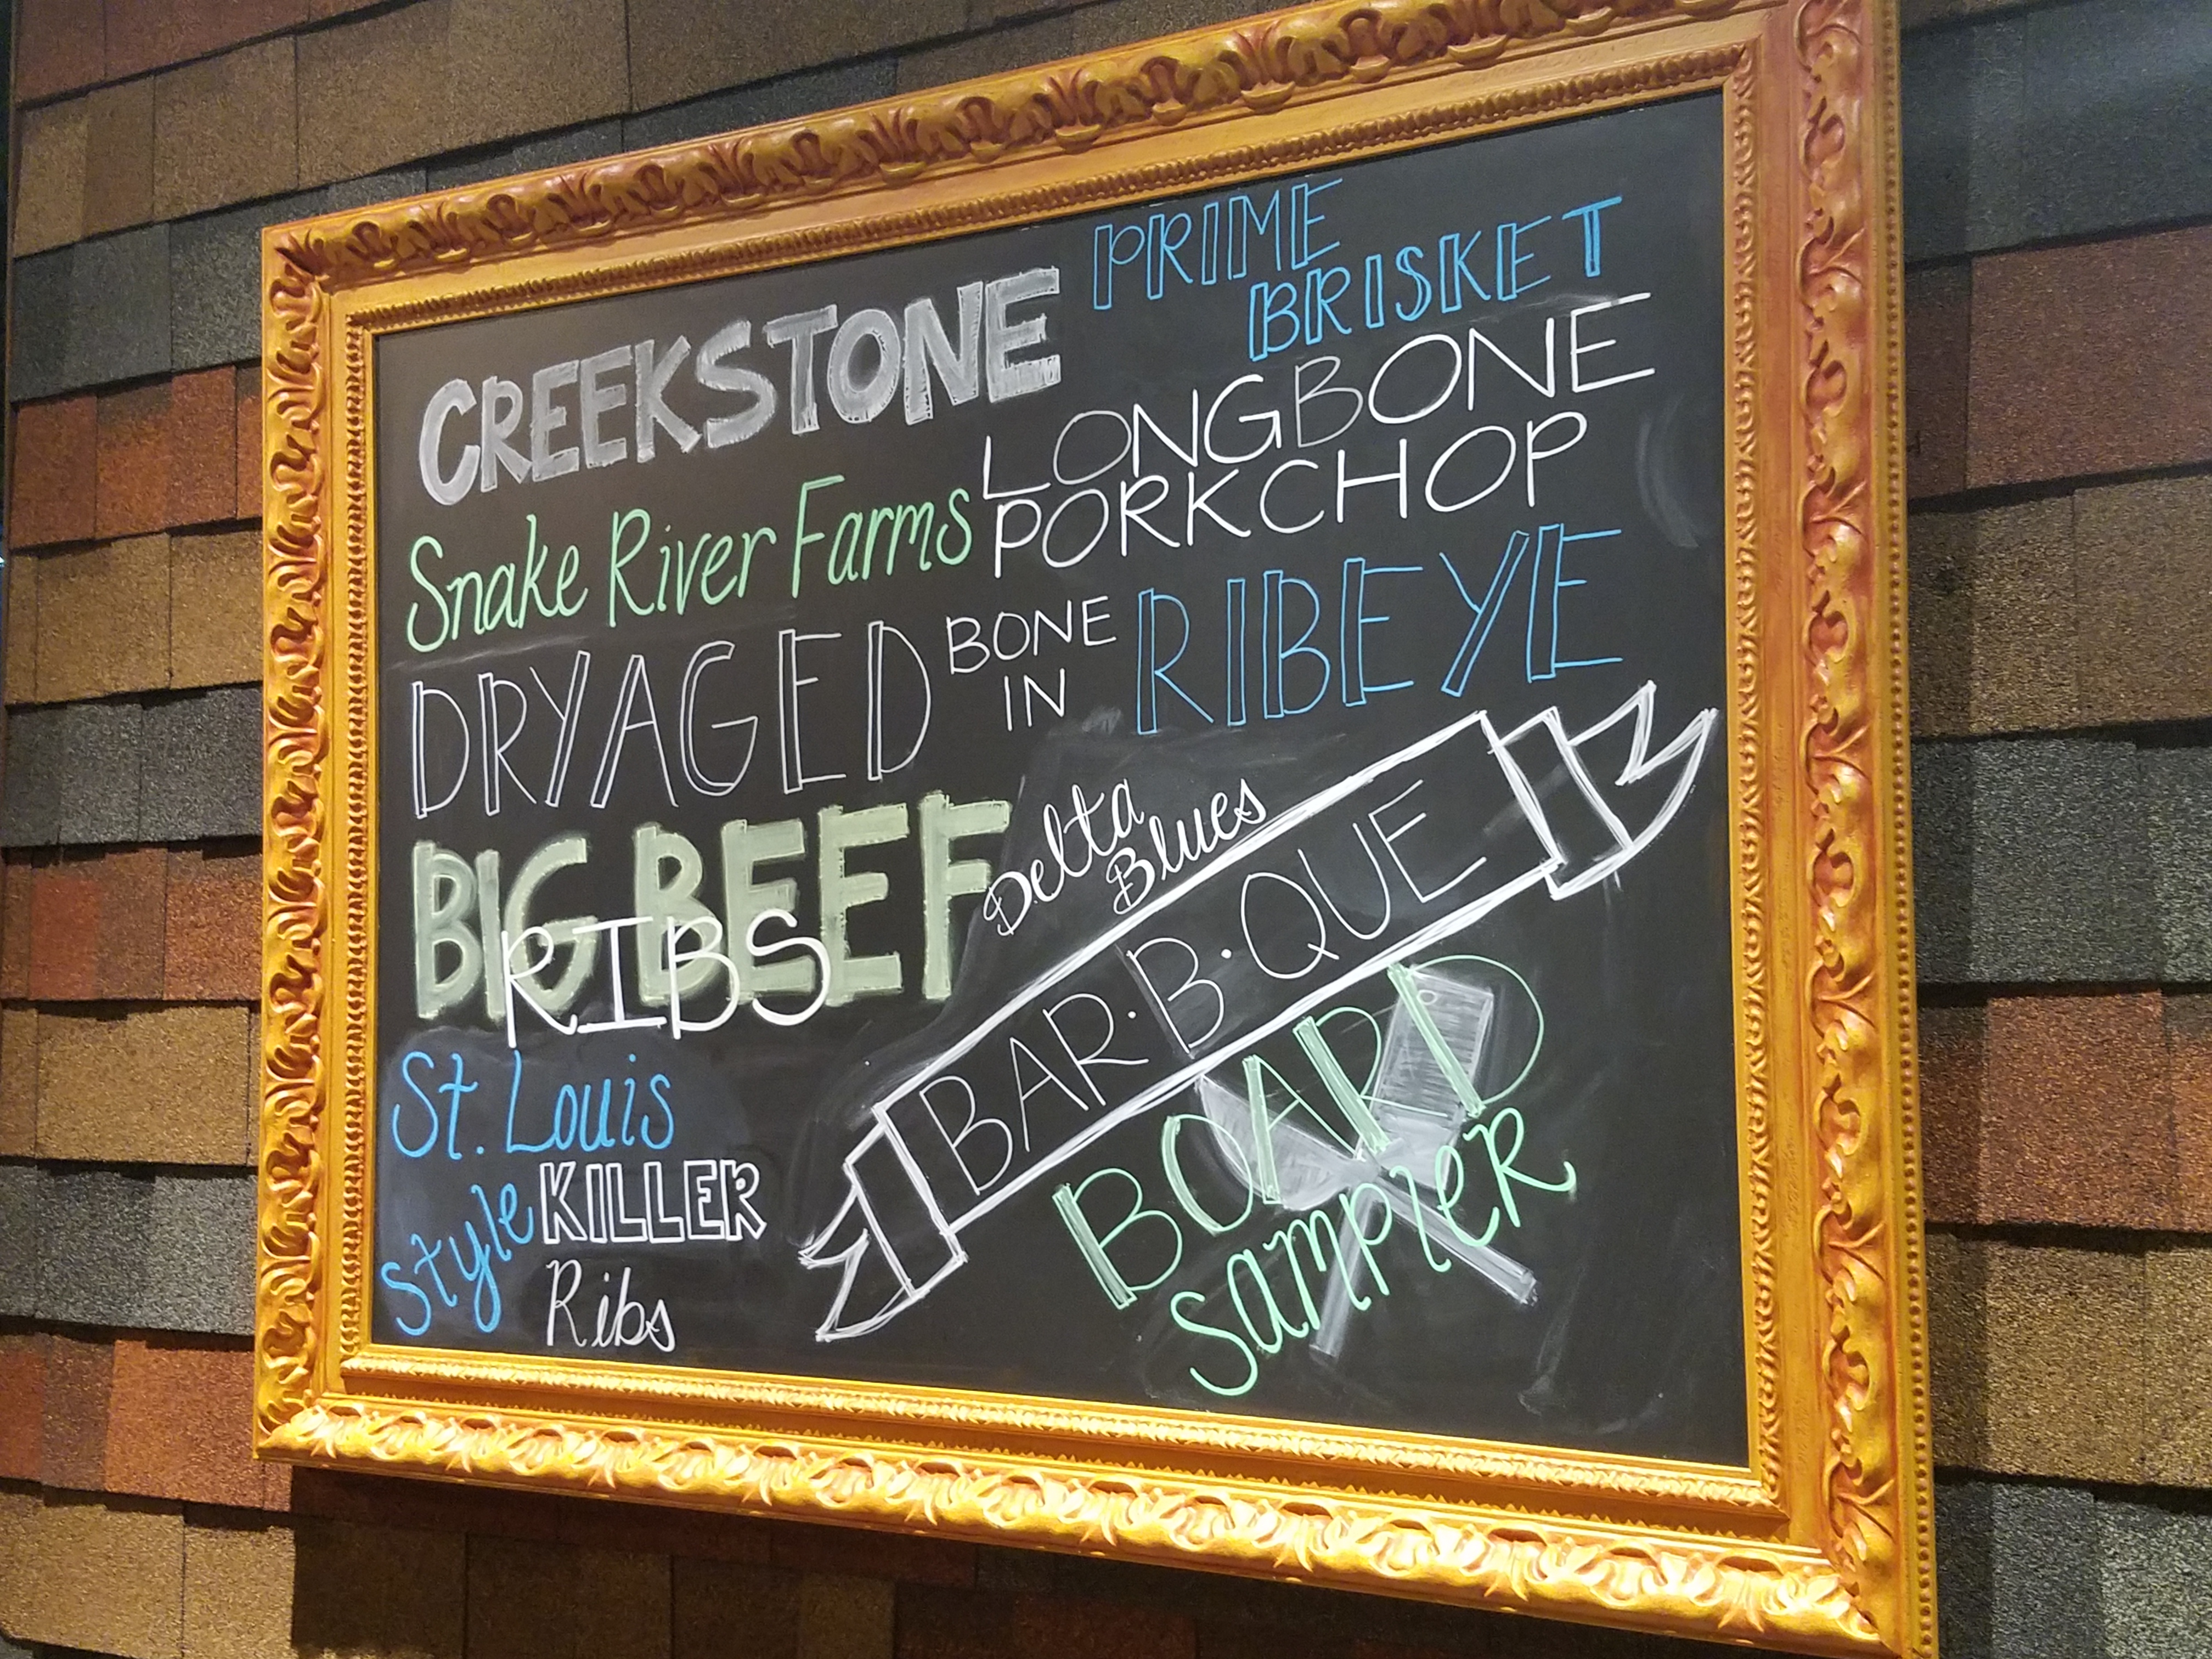 A chalkboard sign outside the restaurant featuring signature menu items. Photo by The Signal reporter Bianca Salazar.